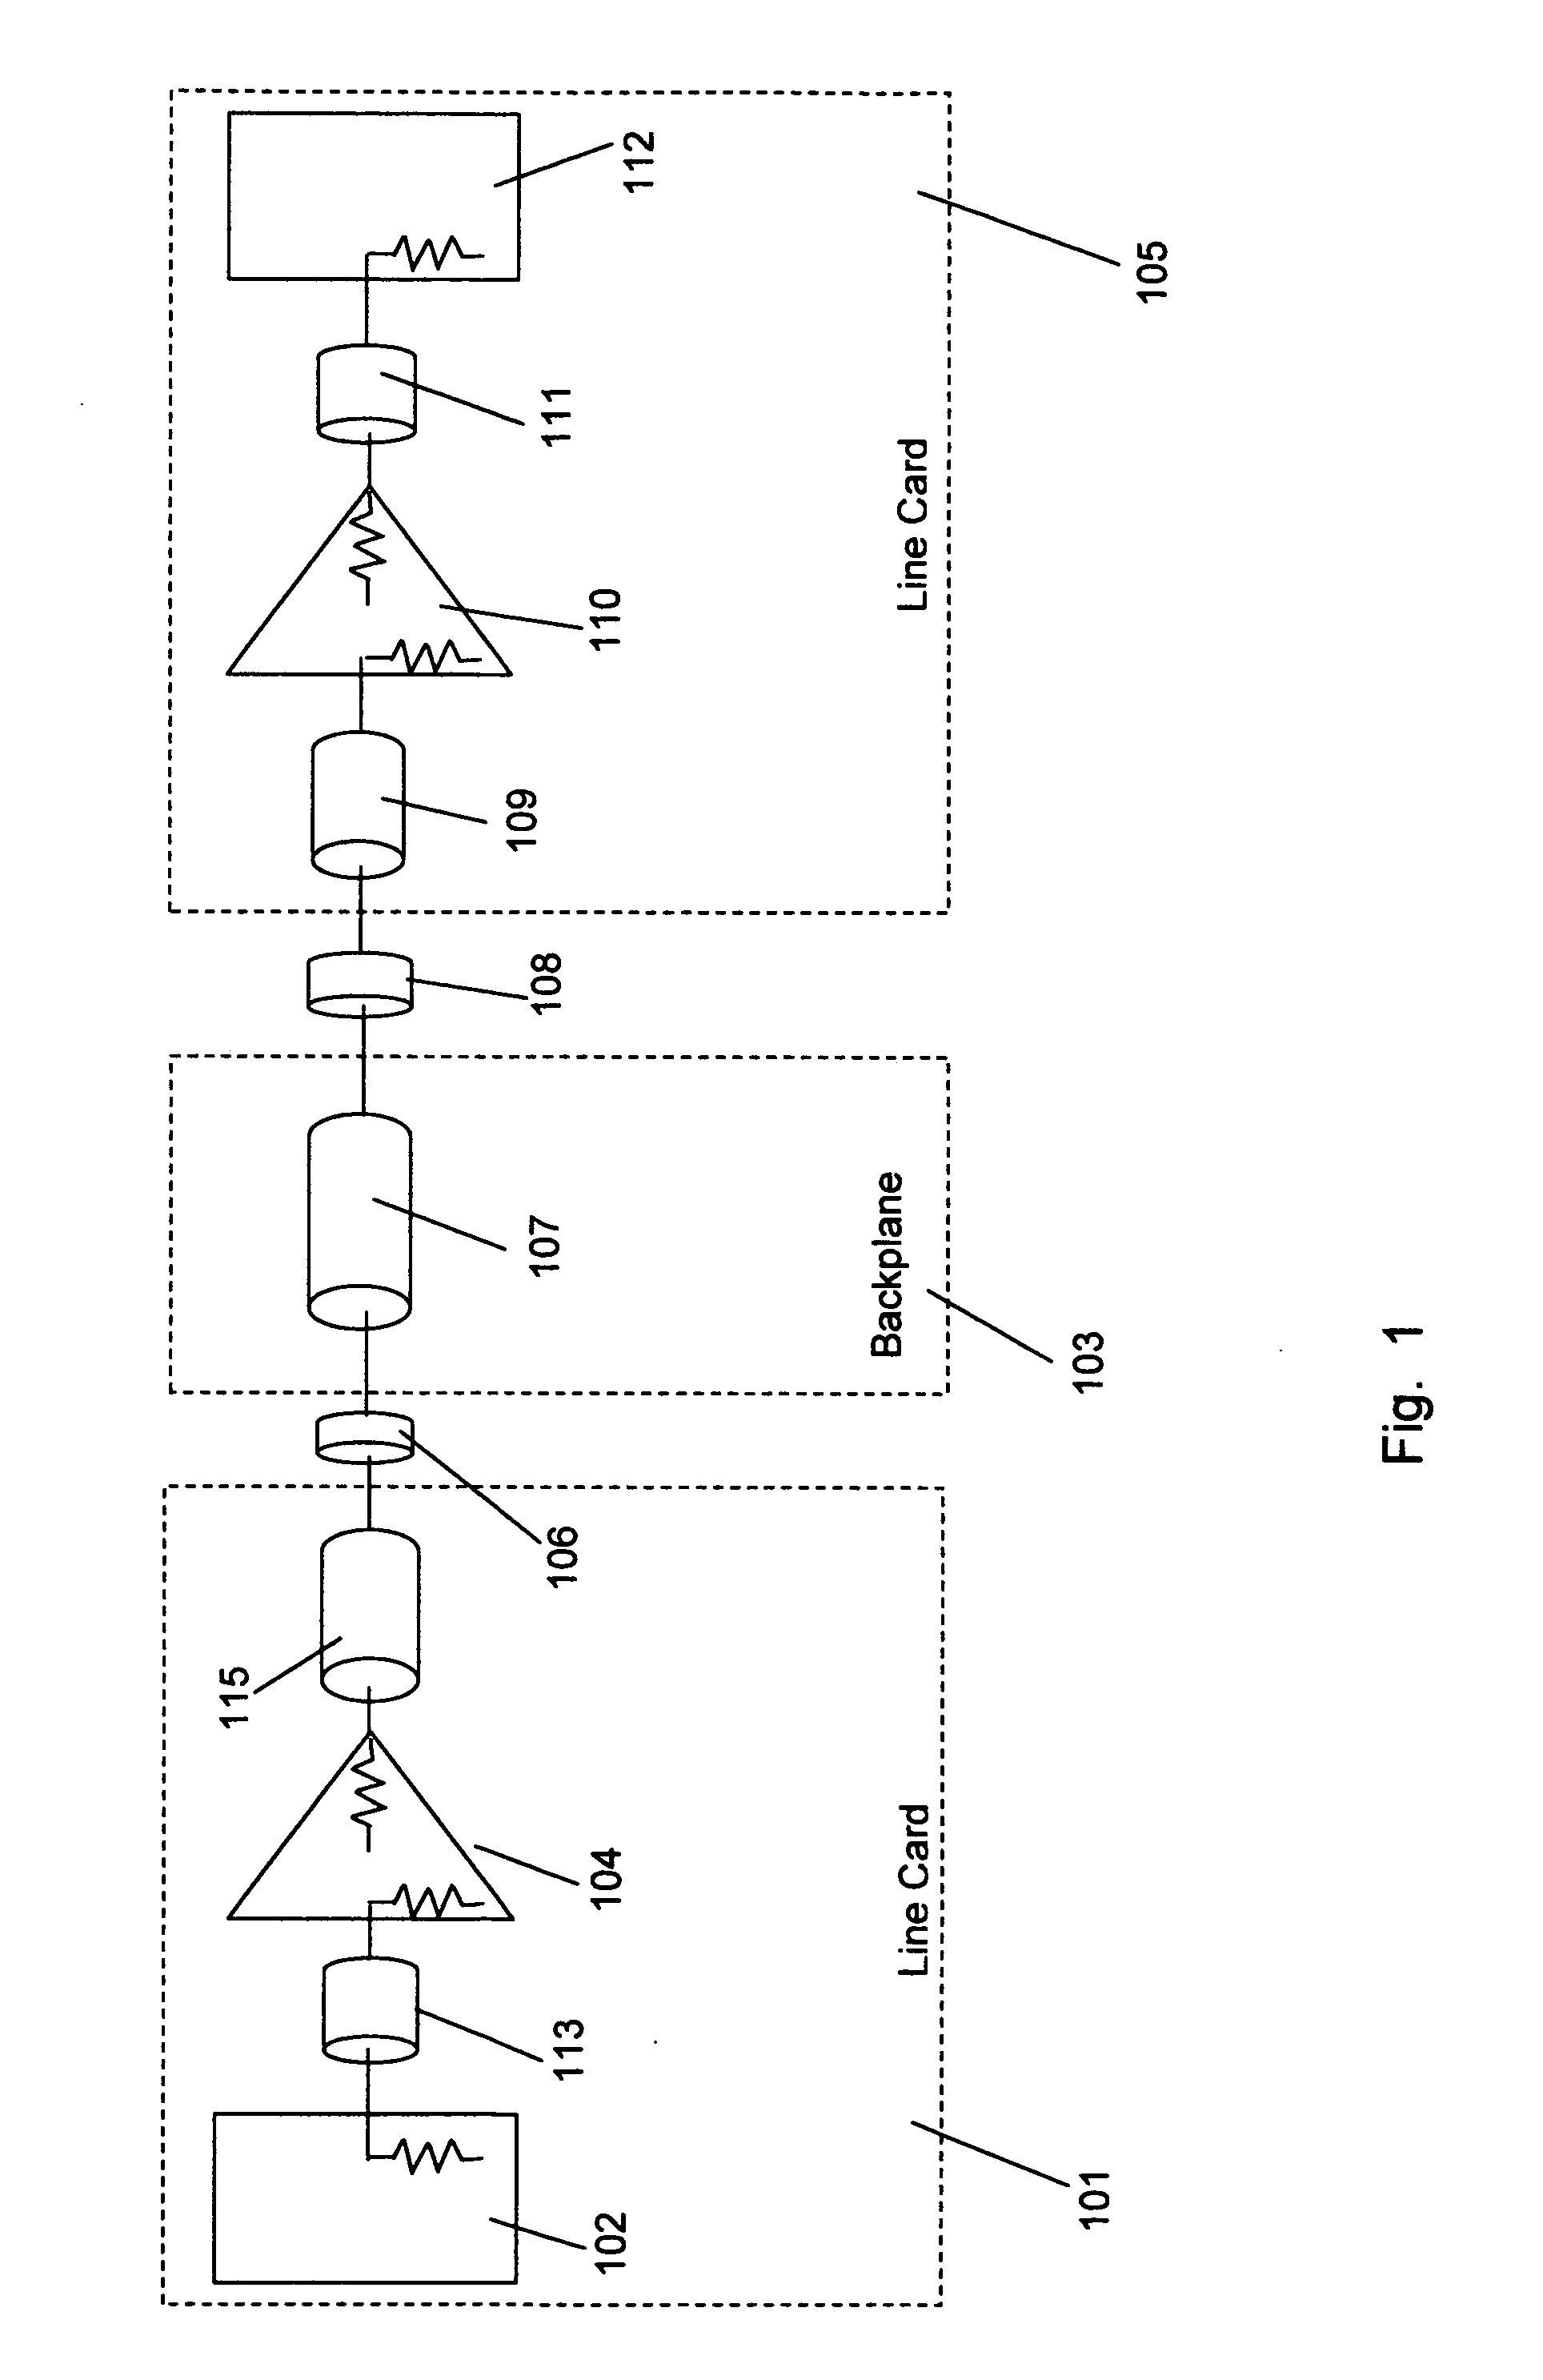 Tightly-coupled near-field communication-link connector-replacement chips